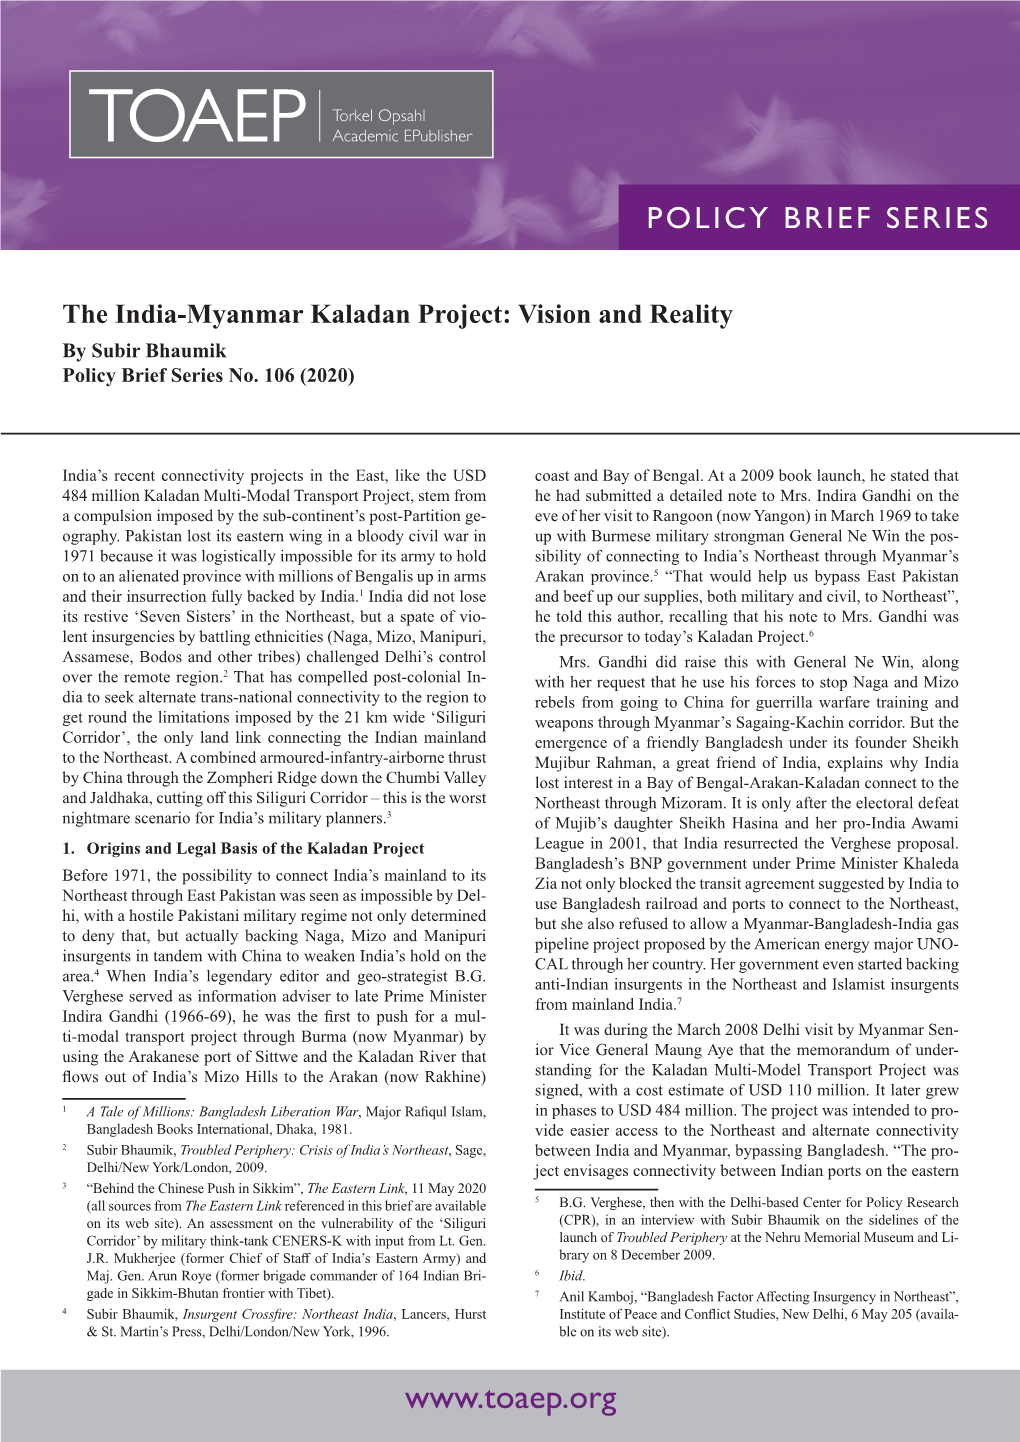 The India-Myanmar Kaladan Project: Vision and Reality by Subir Bhaumik Policy Brief Series No